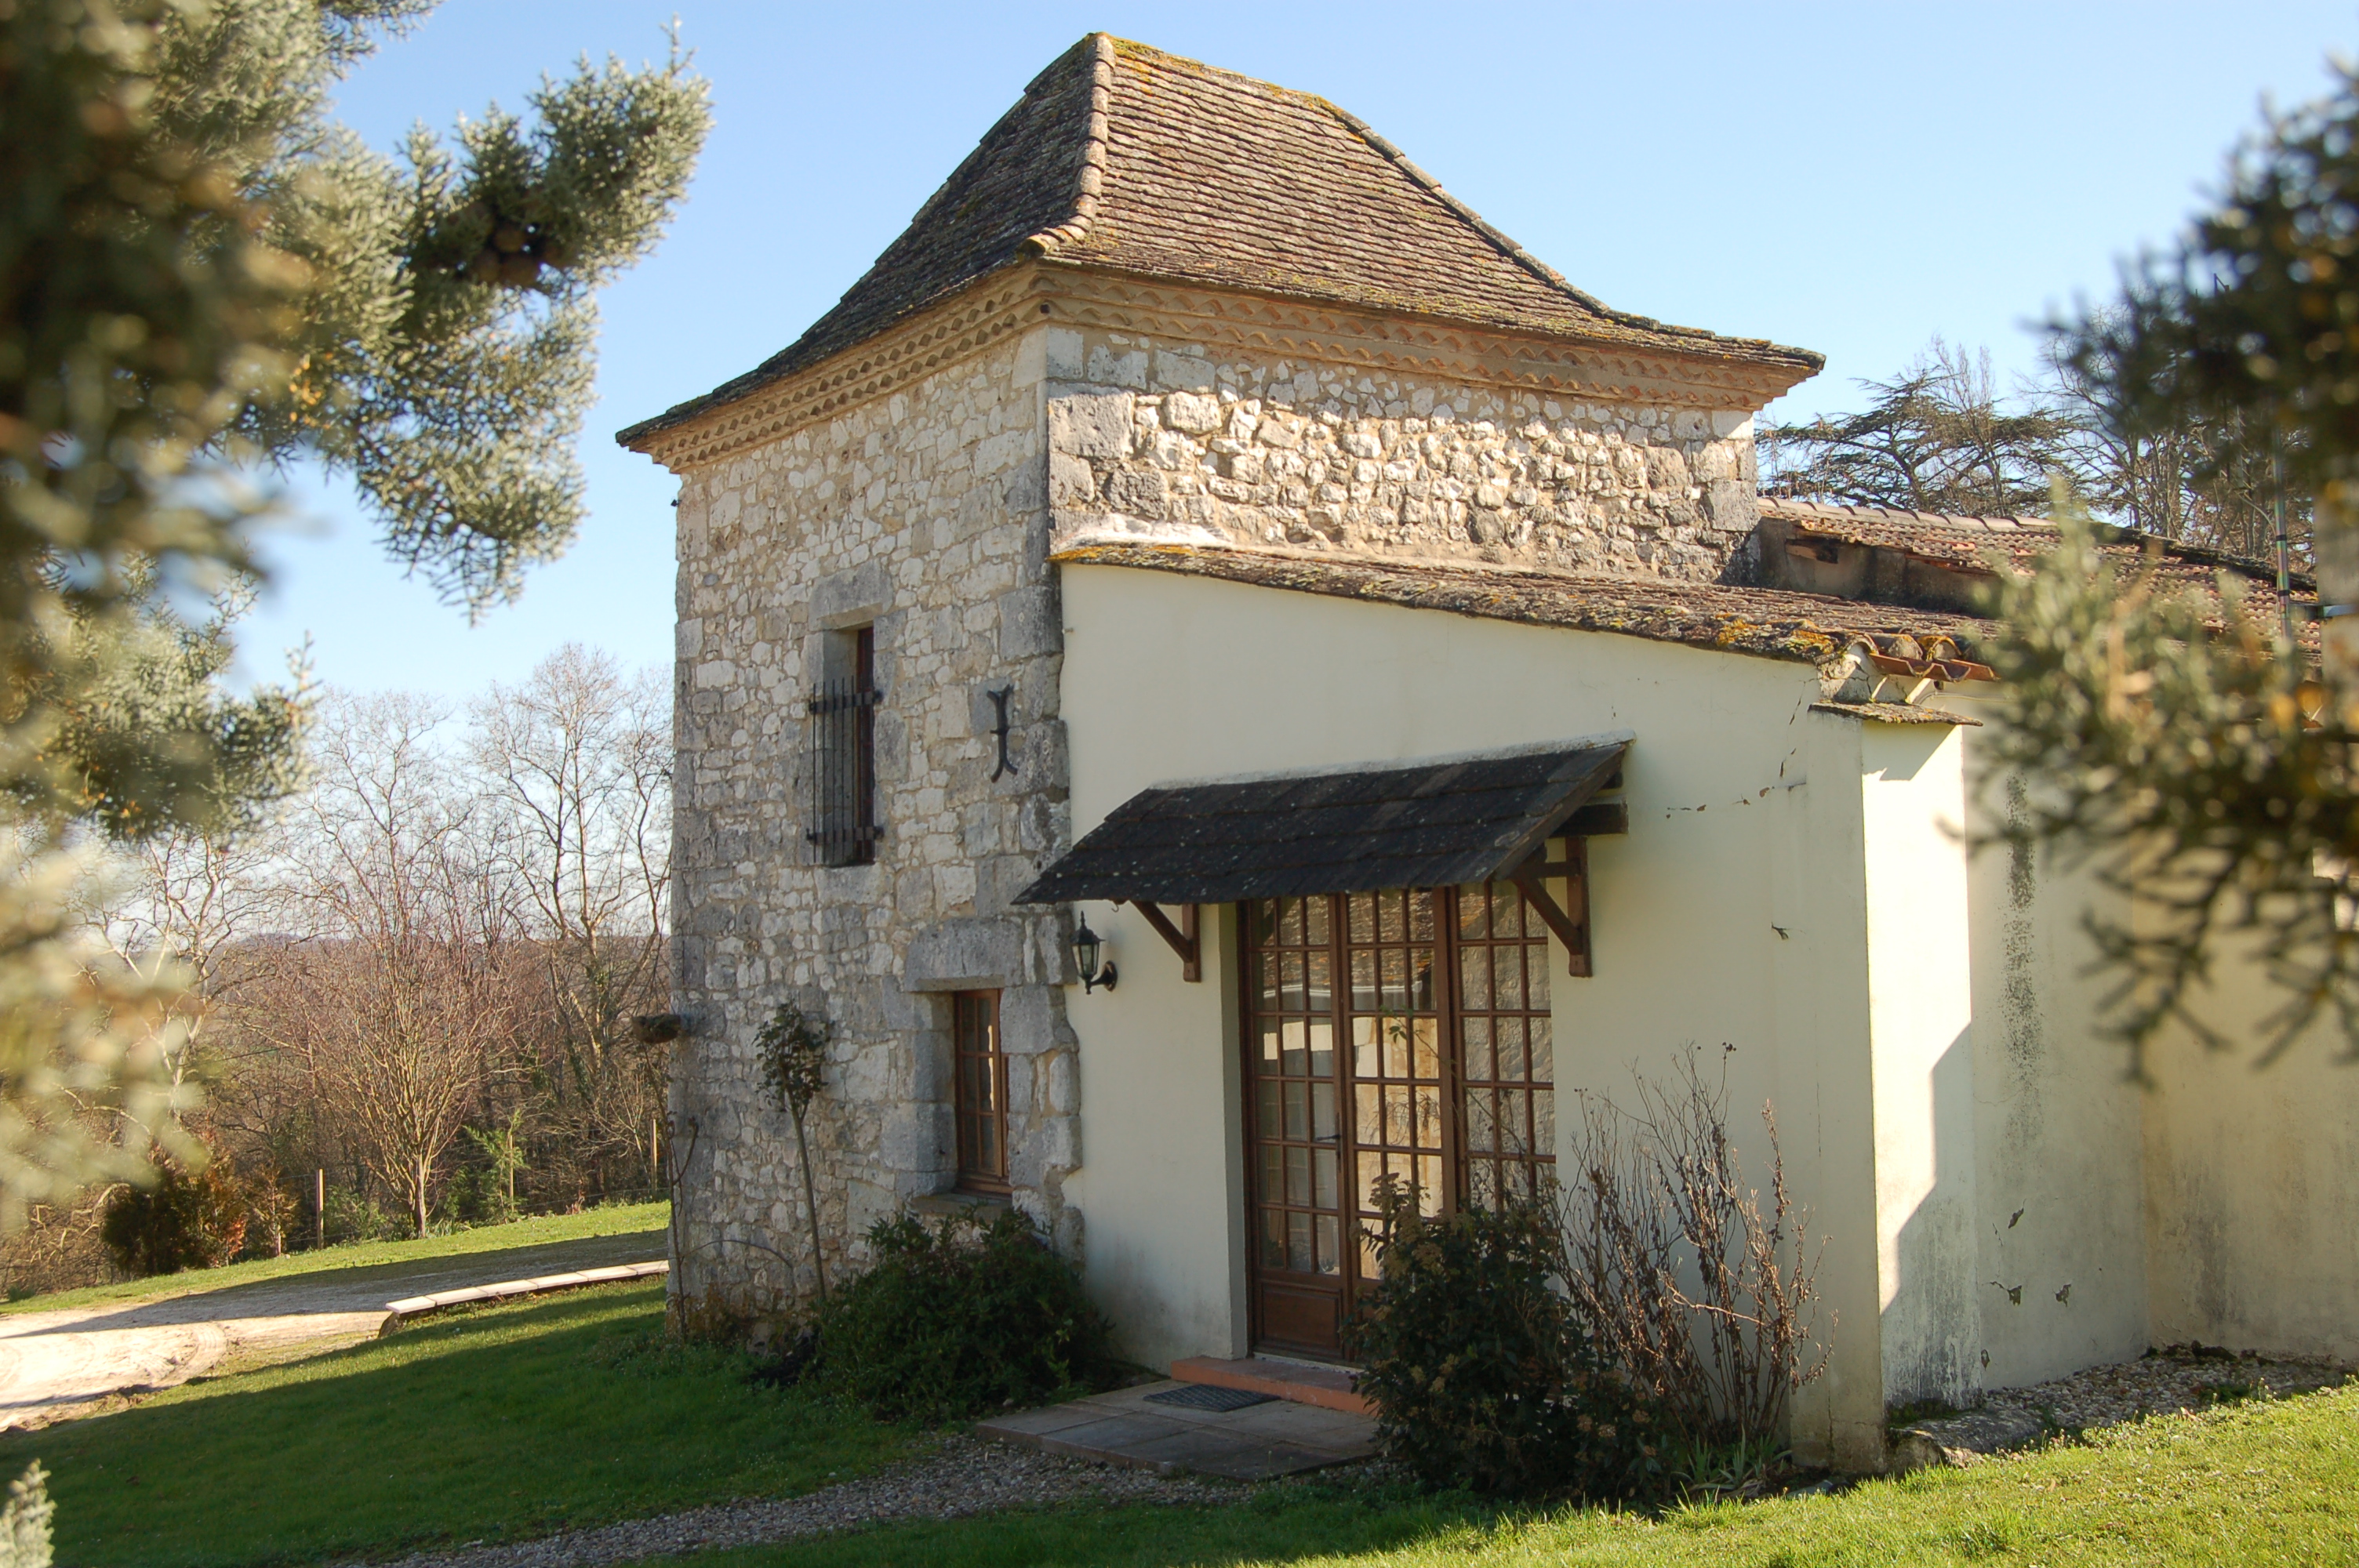 Domaine de Pmontier - Farmhouse holiday accommodation in South-West France